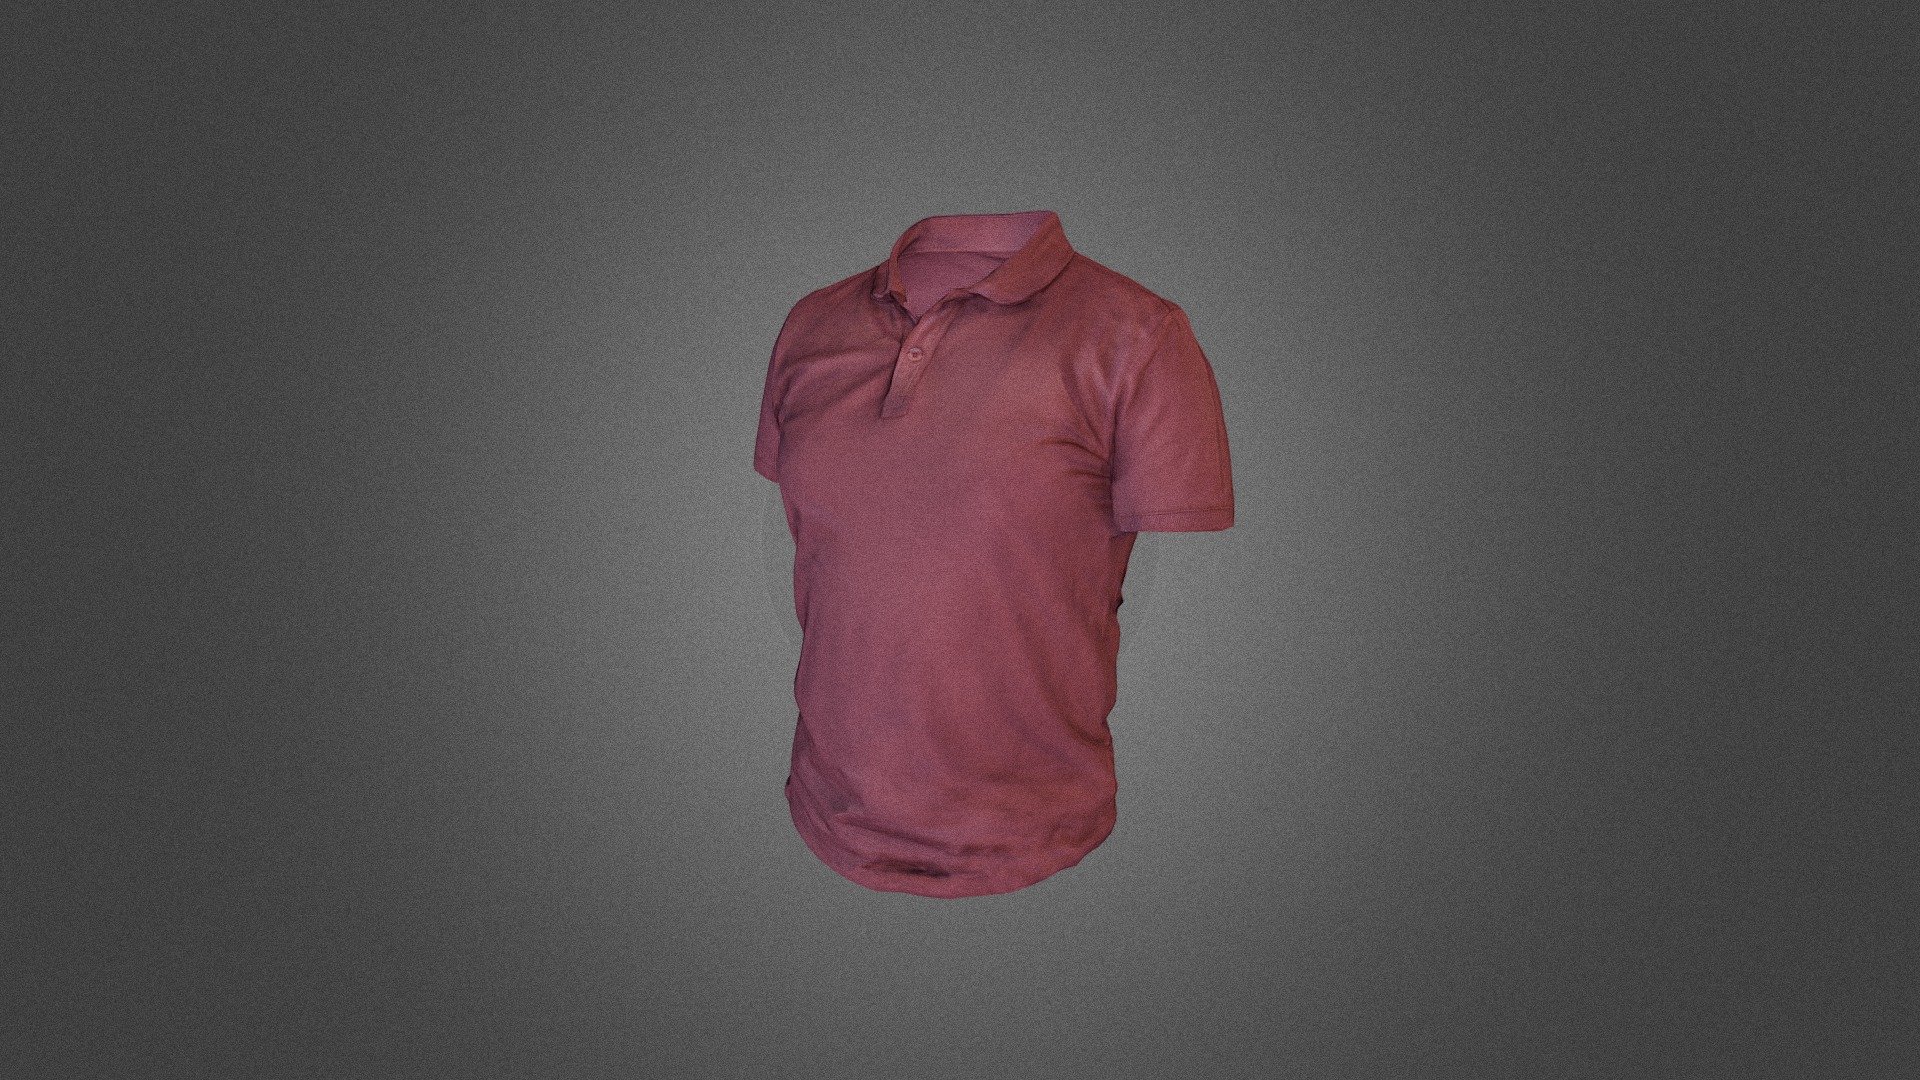 3D model T-shirt low poly - This is a 3D model of the T-shirt low poly. The 3D model is about a pink shirt on a white surface.